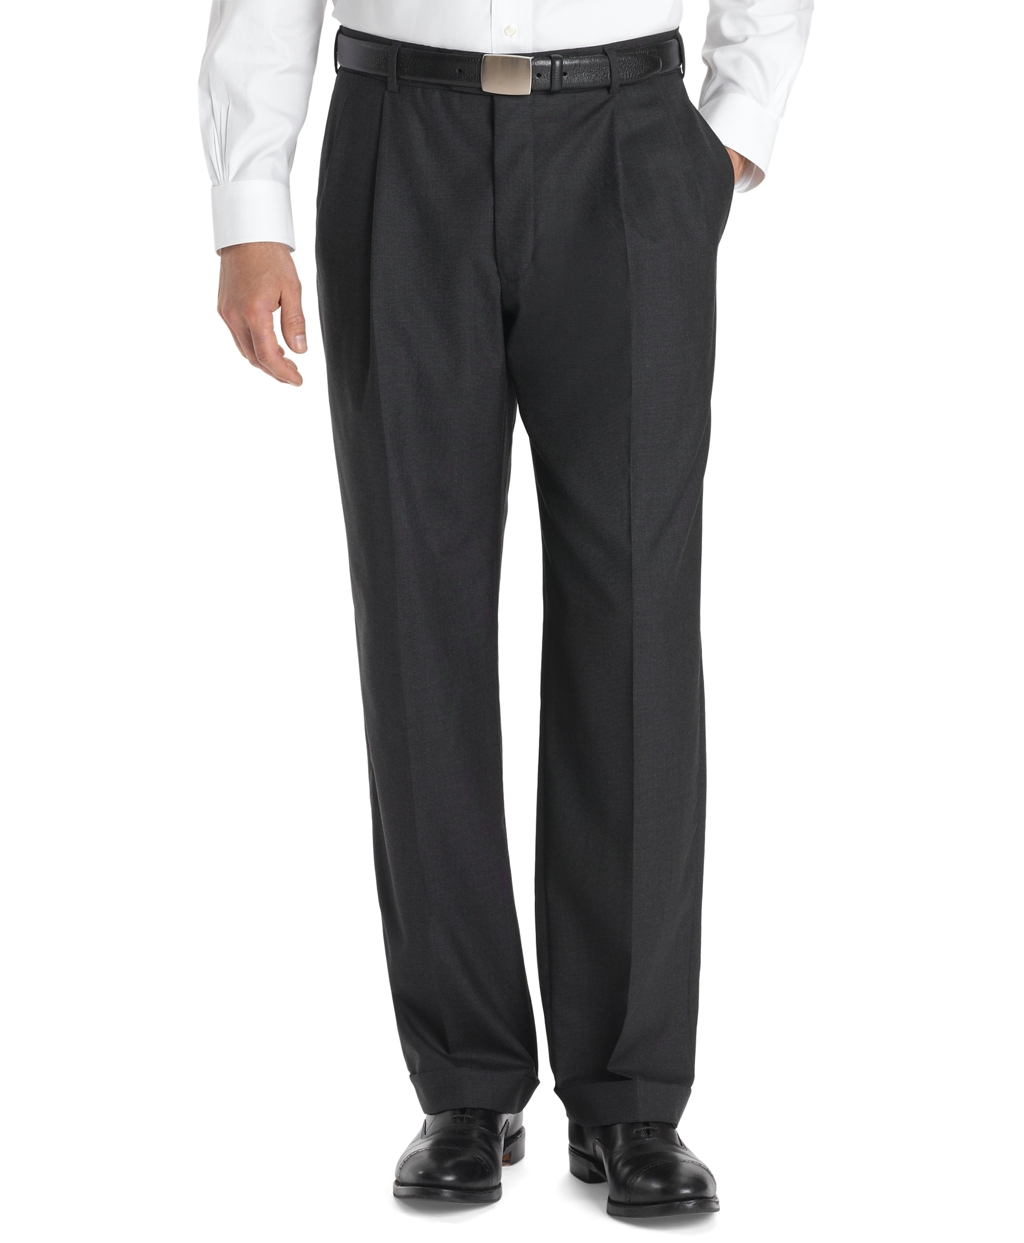 Your input on these trousers. Most versatile color to add? | Men's ...